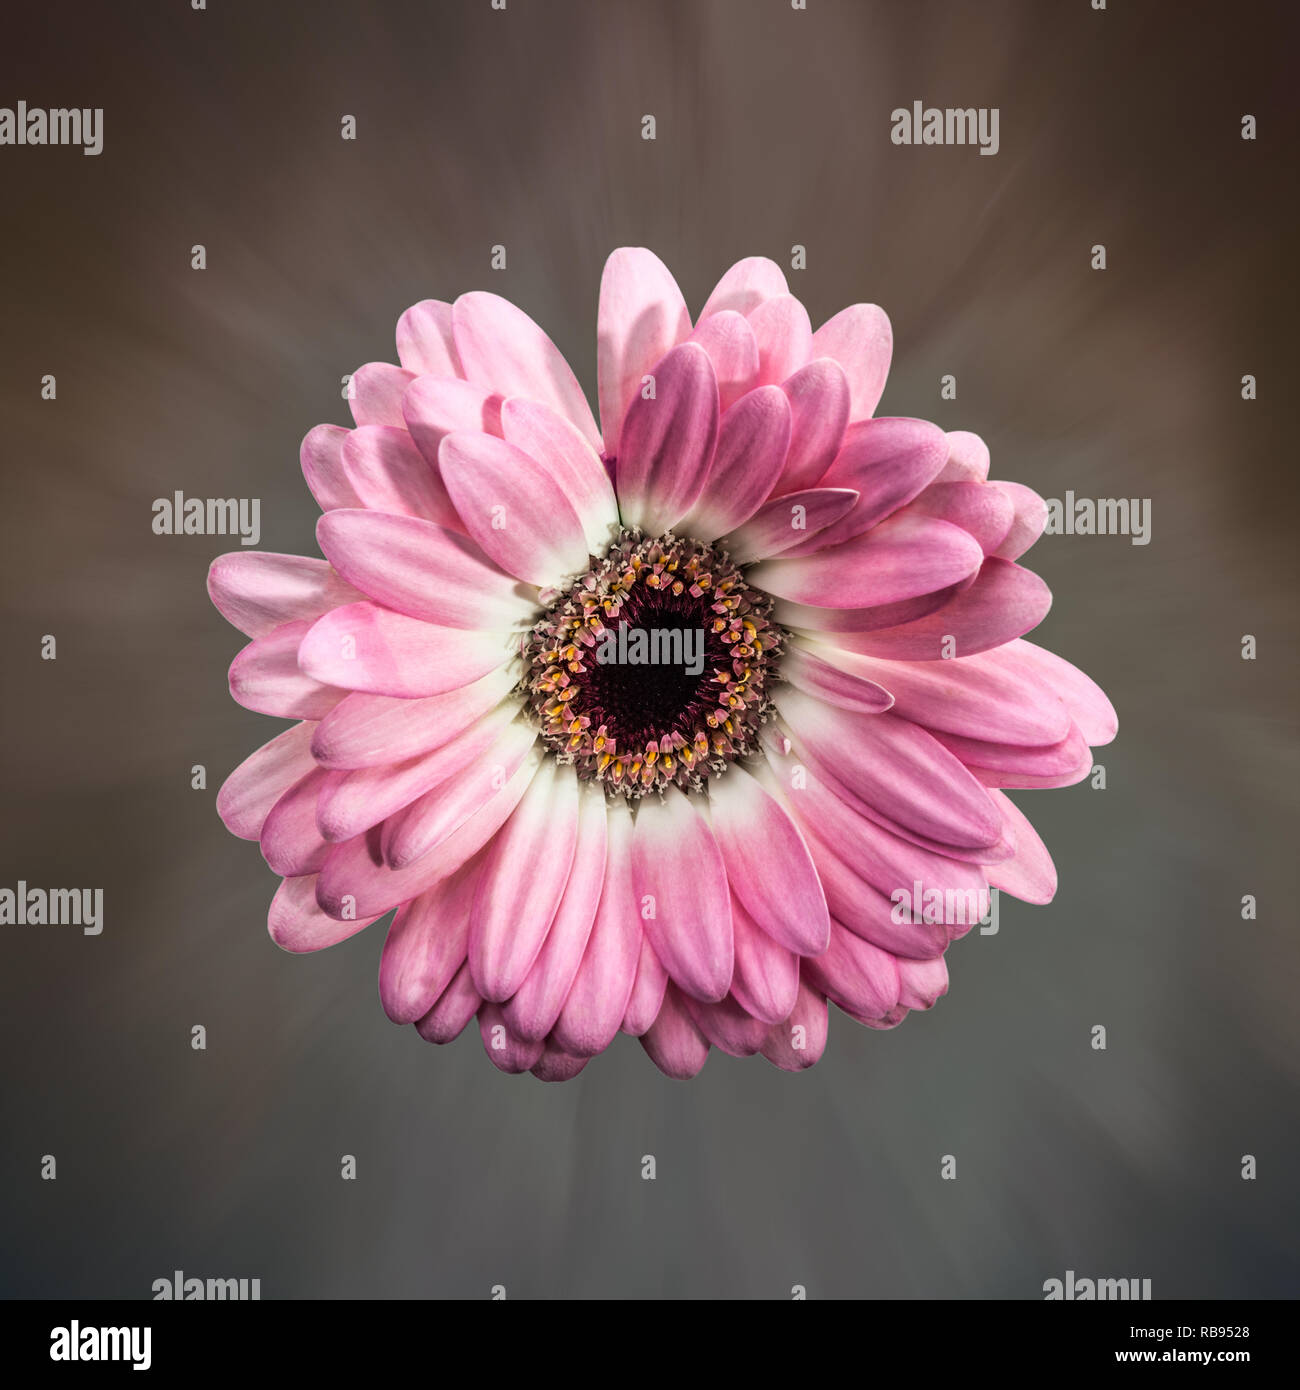 Pink gerbera daisy glower on a pastel and brown background Stock Photo